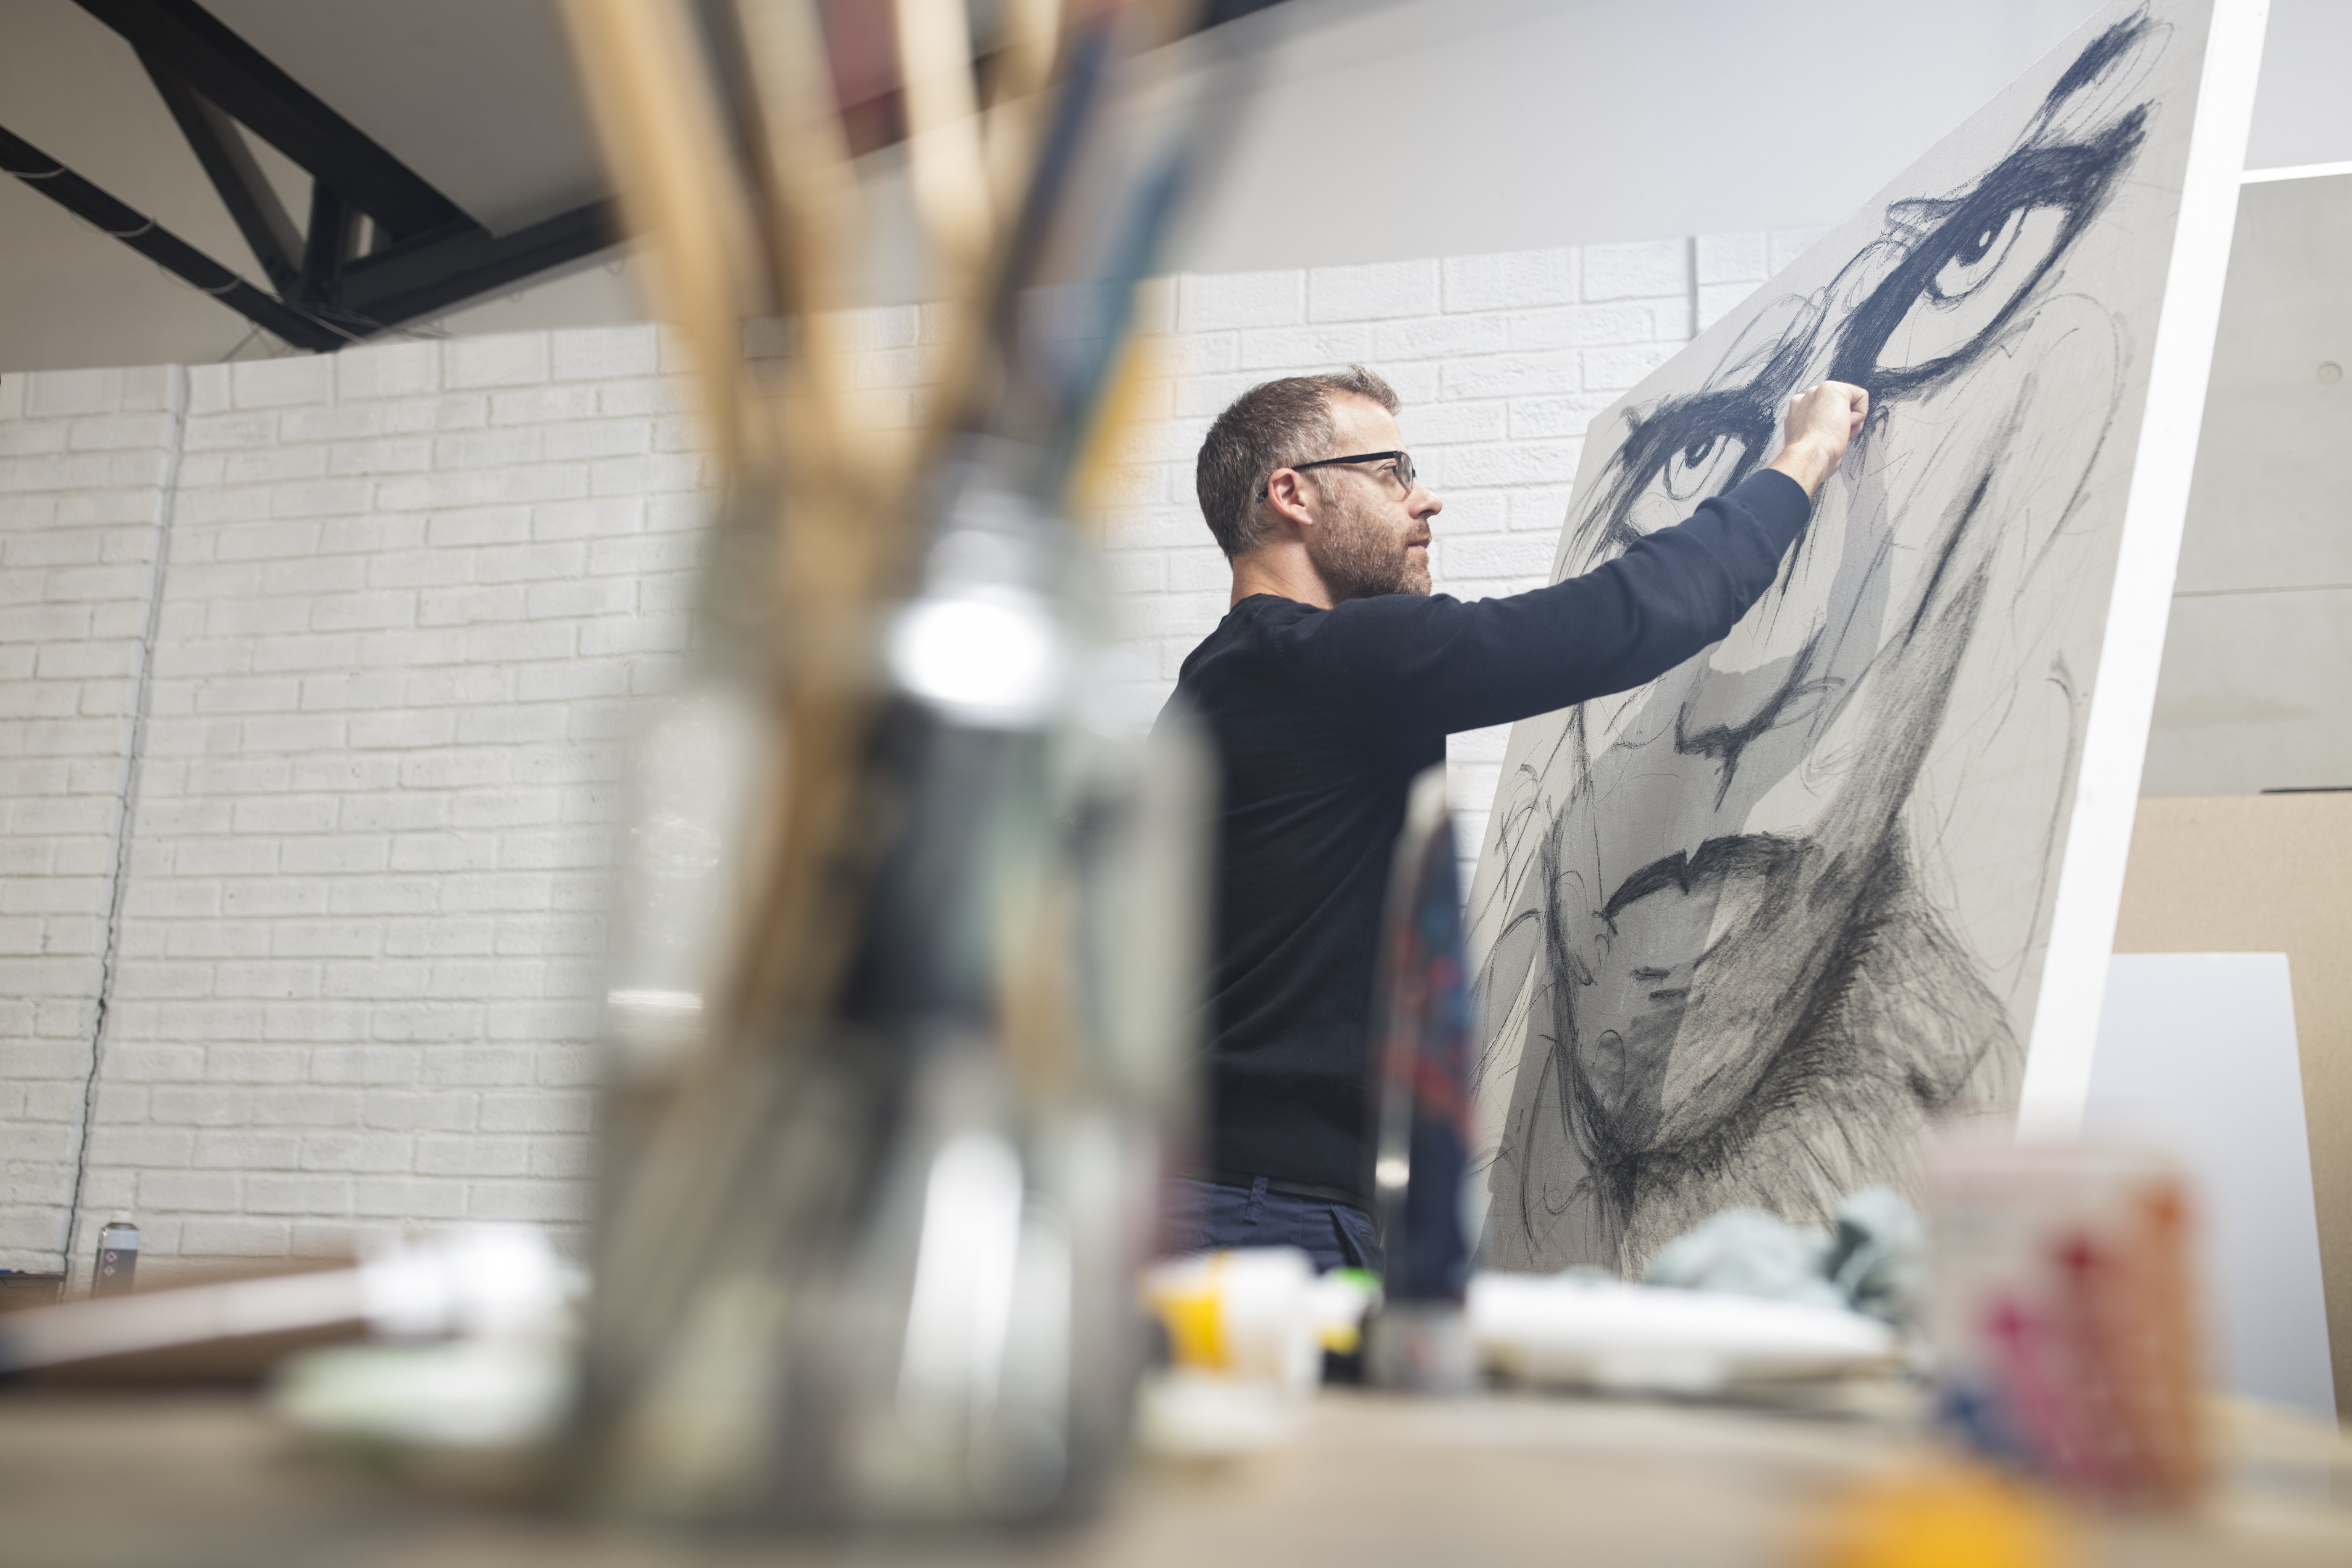 Man drawing an image in a  studio | Photo: Getty Images